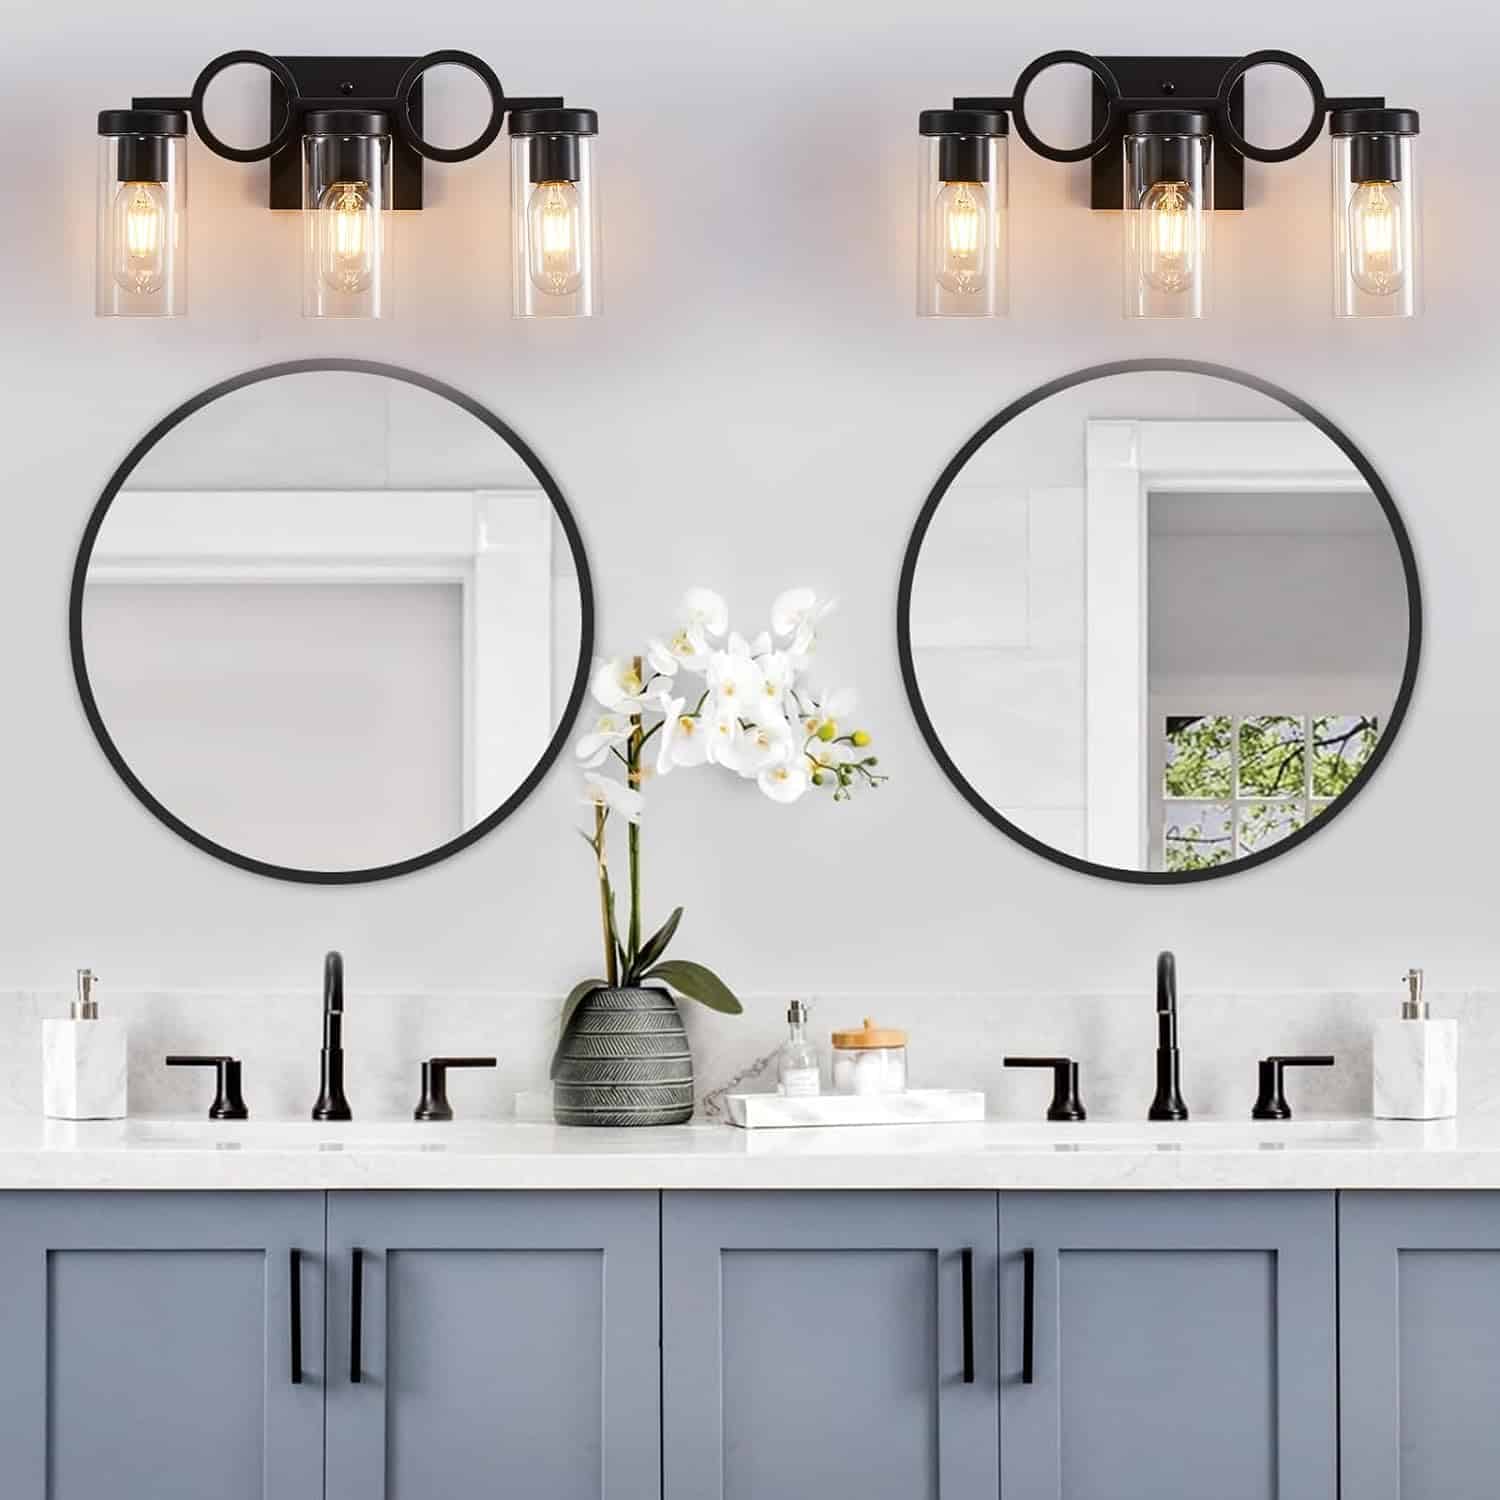 SADENICEL 3 Light Bathroom Vanity Light Fixtures: A Perfect Blend of Style and Functionality